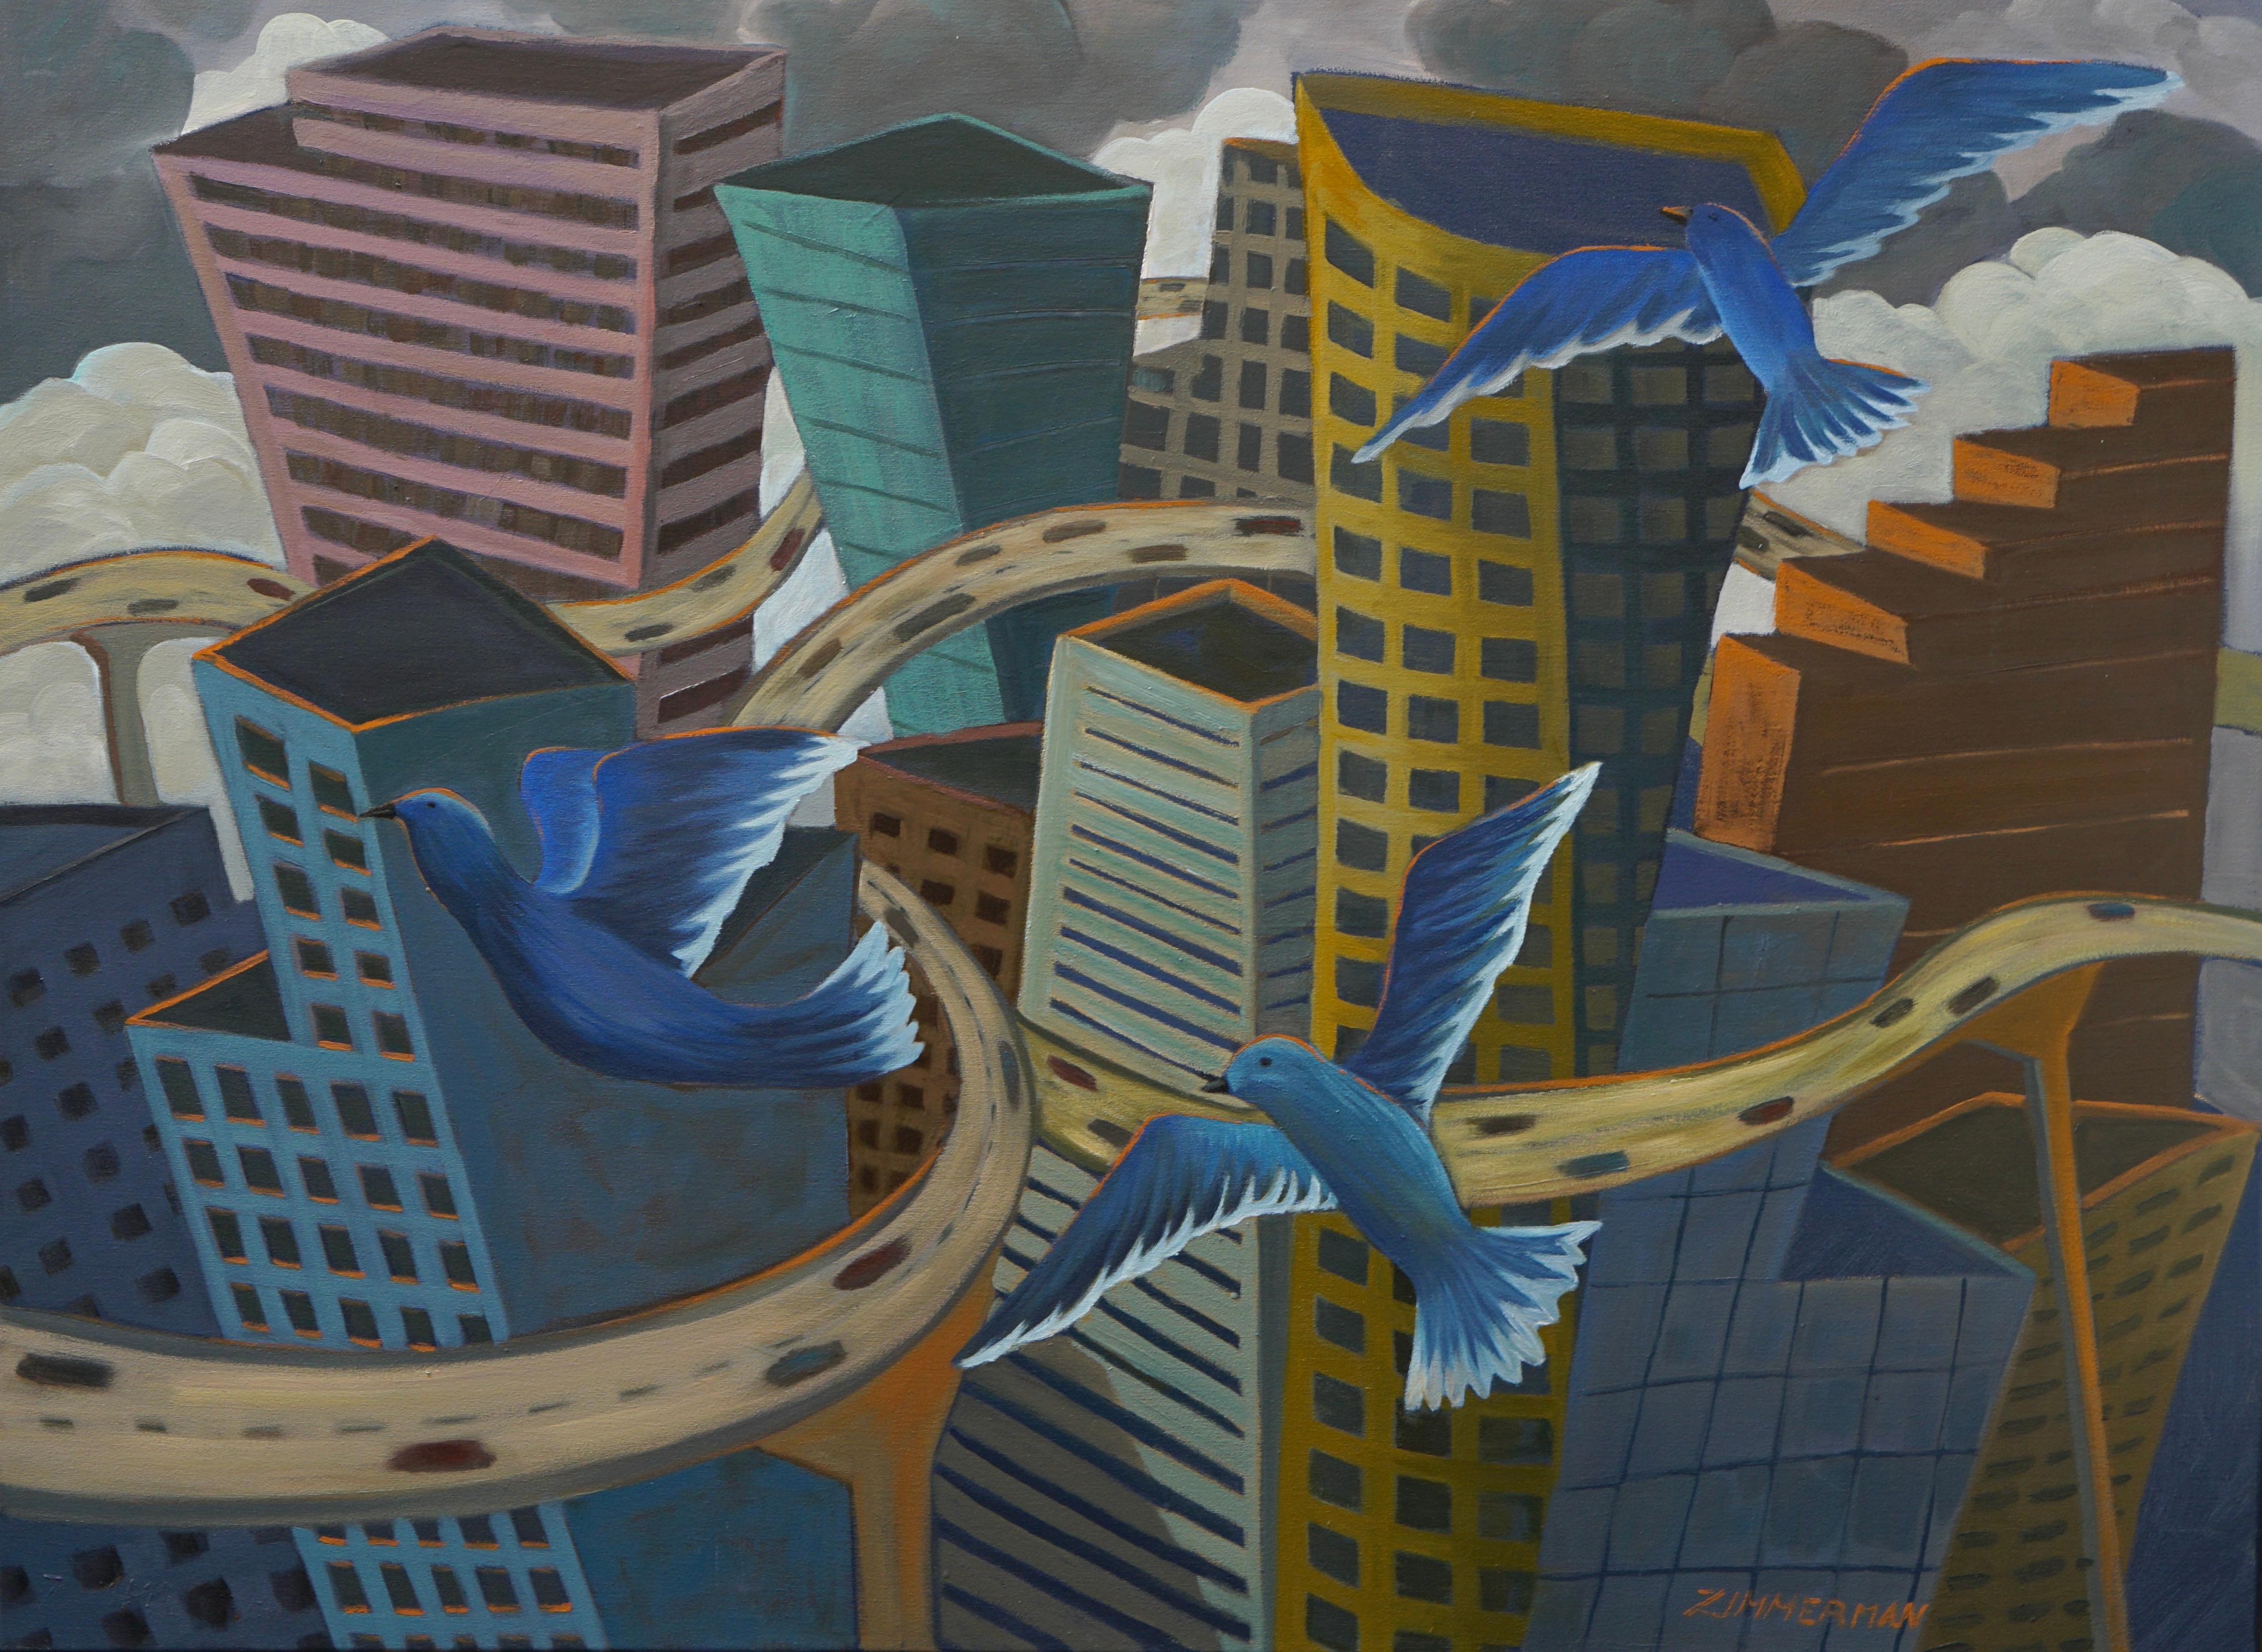 Ascending and soaring blue birds give rhythm and grace to the city. This is an artists memory of the city of Portland emphasizing the river and bridges.

'Peace Blessings Portland' -Landscape Painting - Oil on Canvas By Marc Zimmerman

This